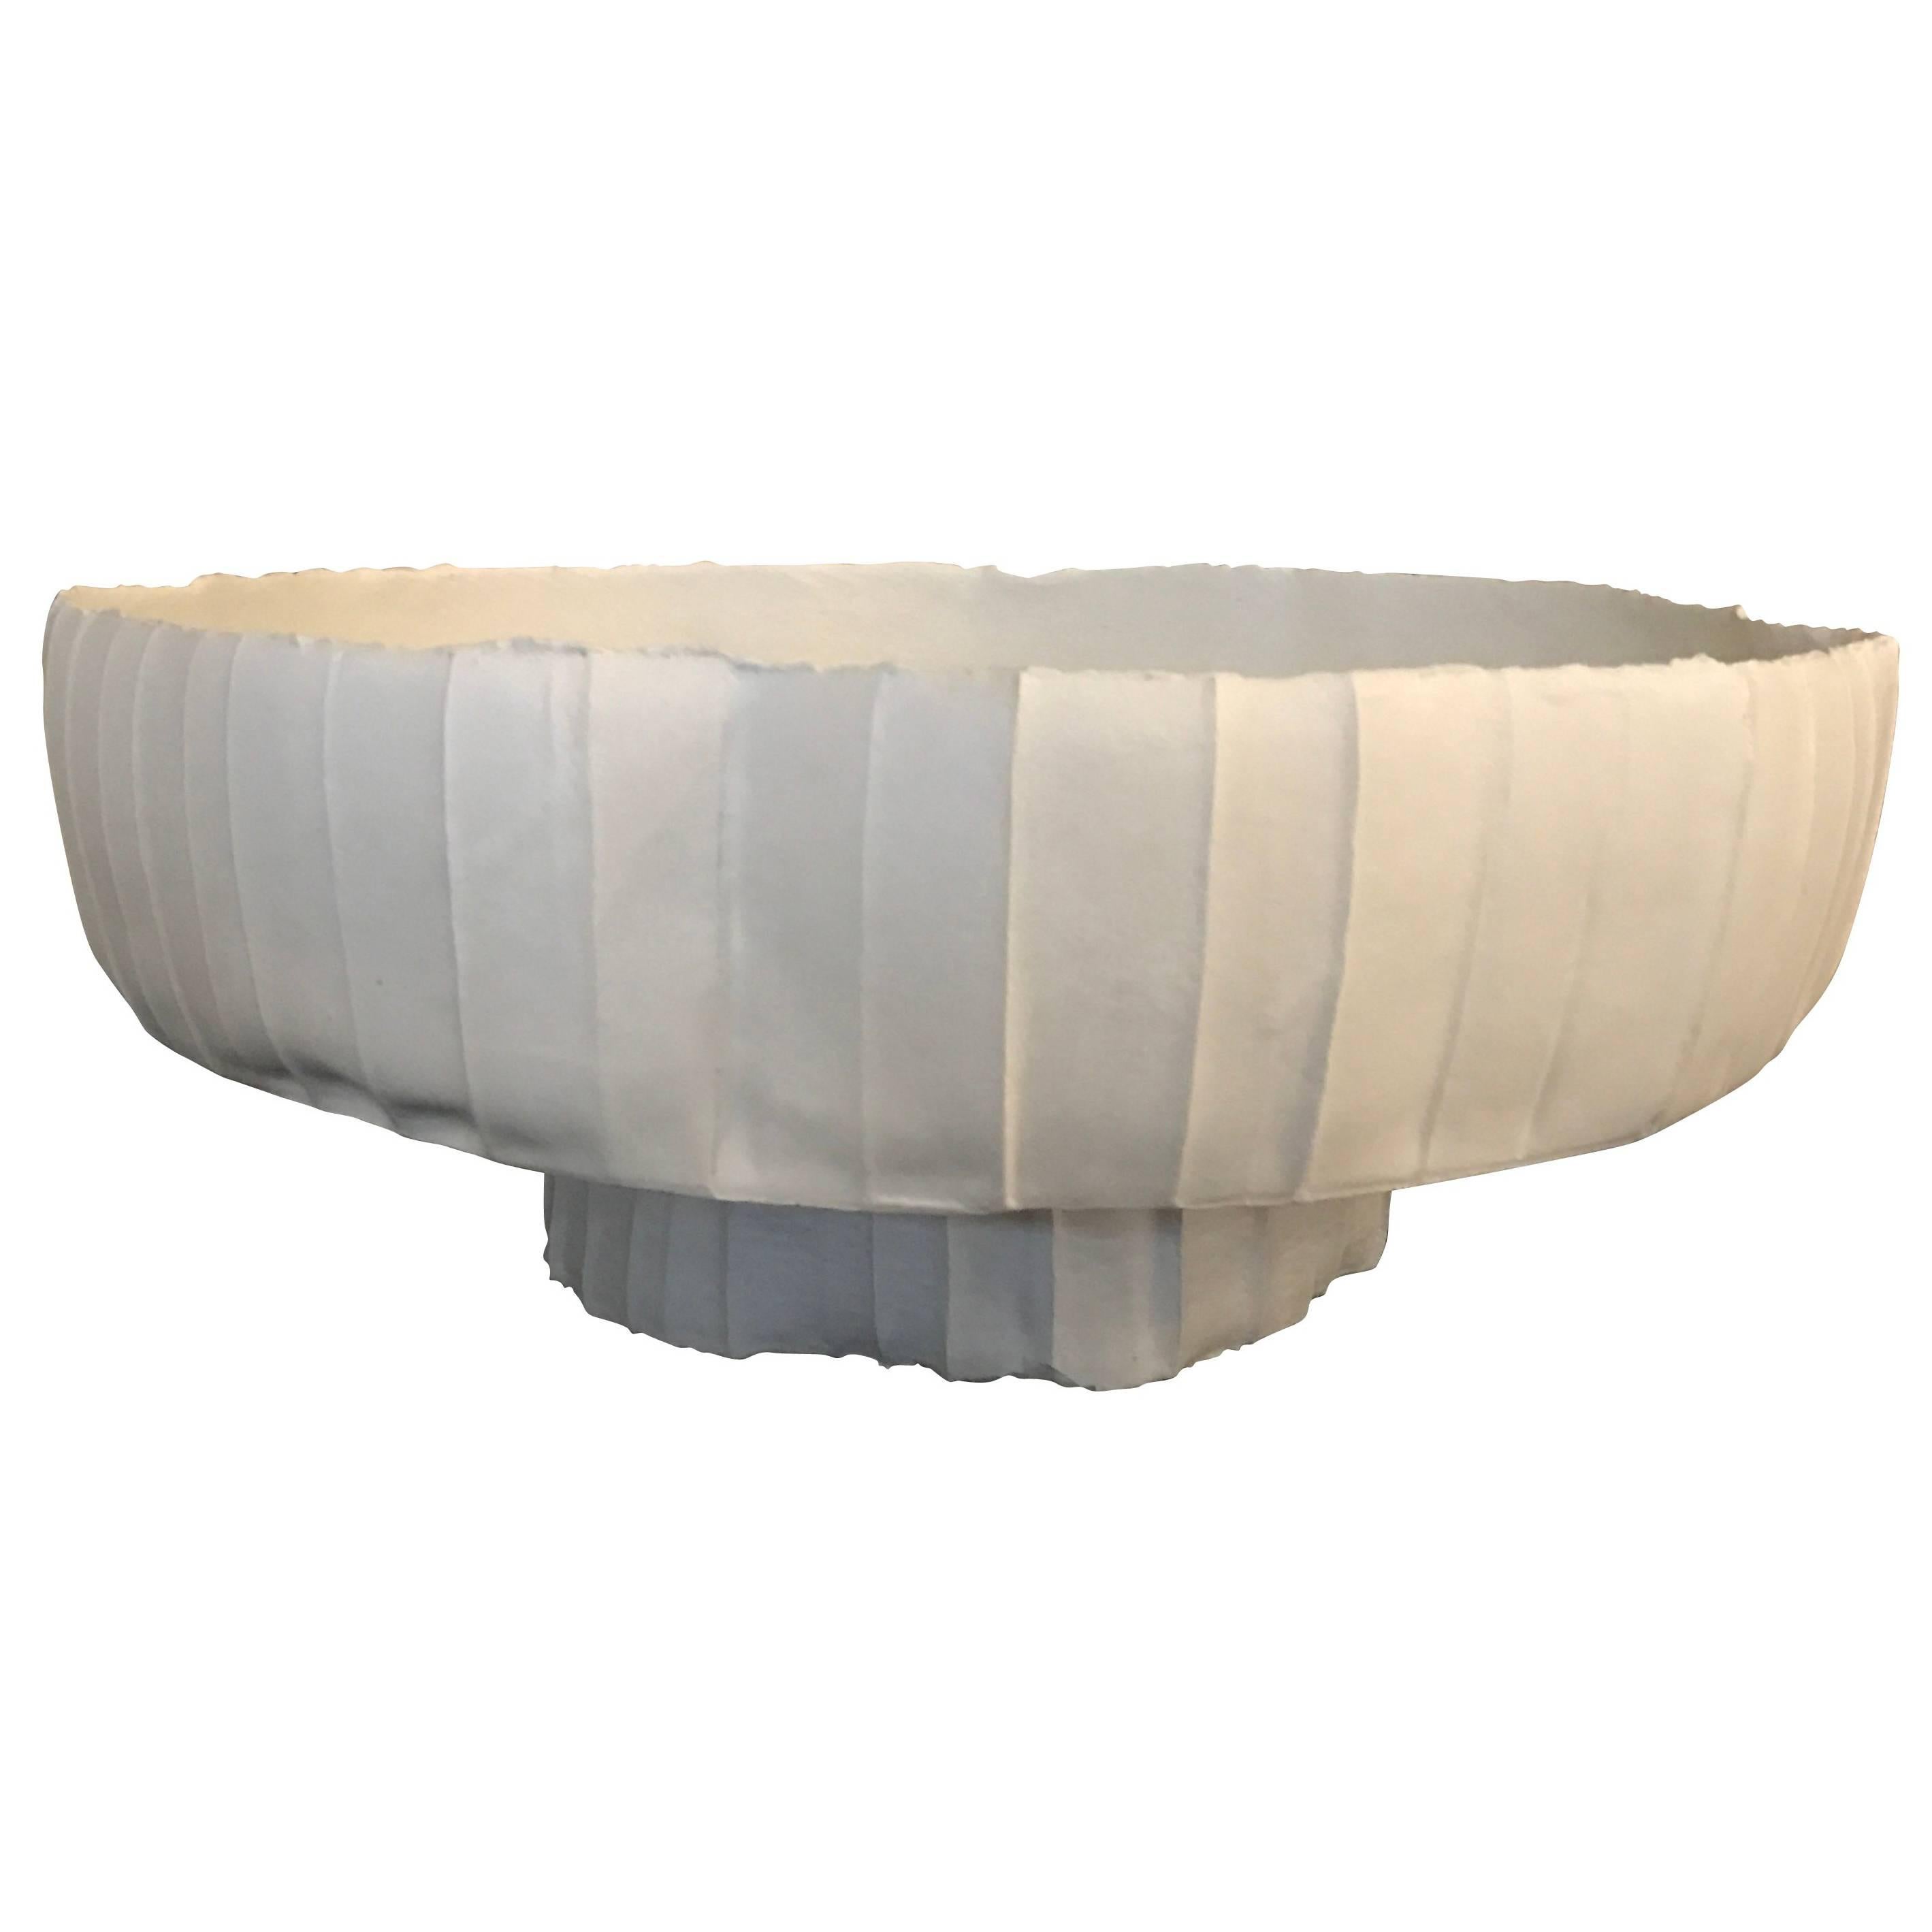 Footed White Ceramic Bowl, Italy, Contemporary